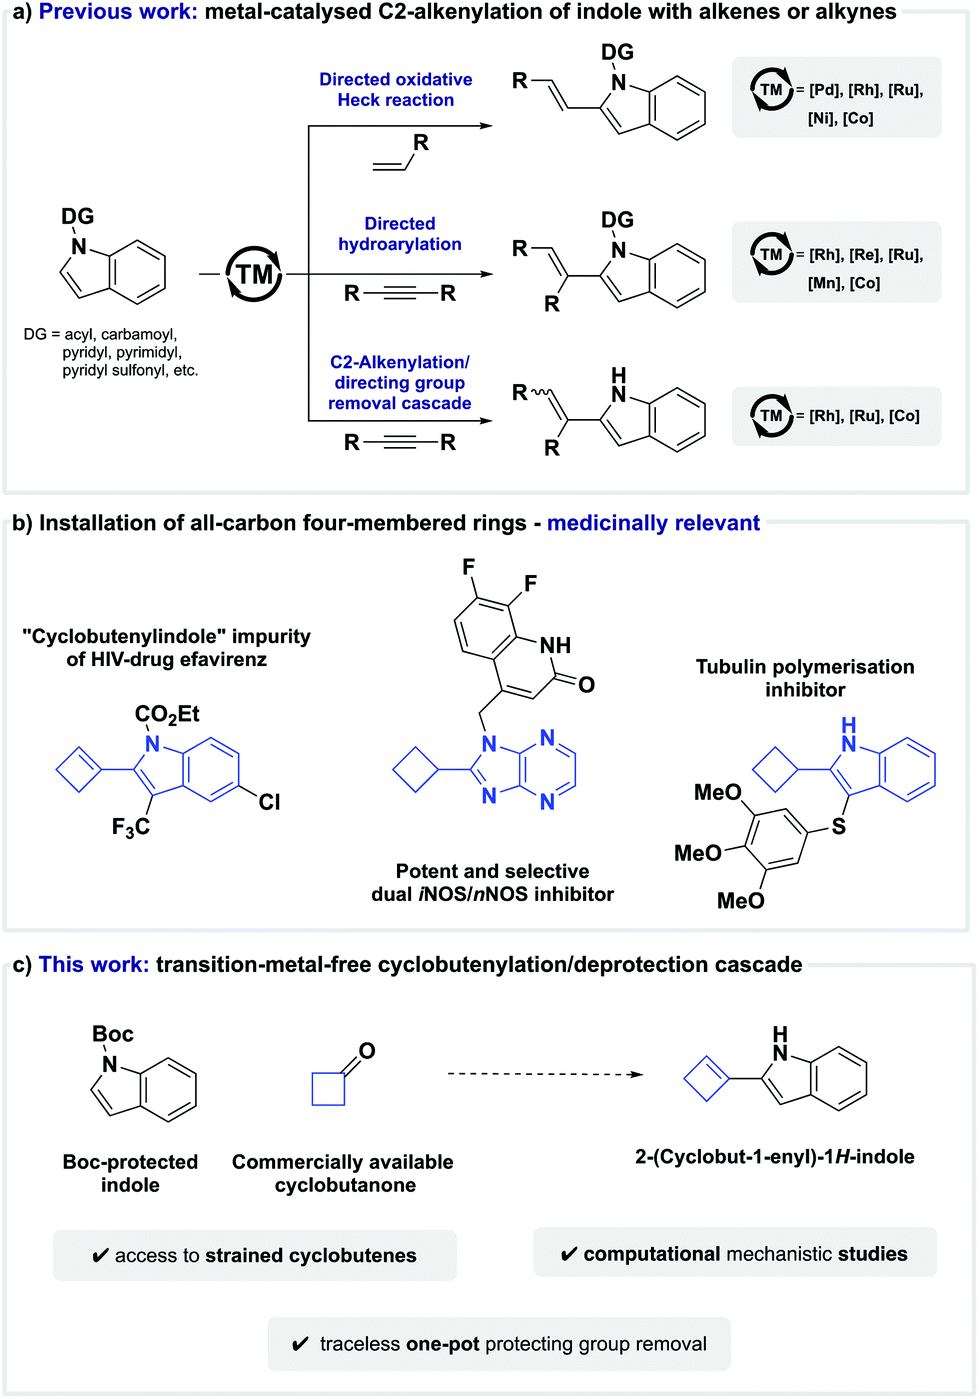 Hydride transfer enabled switchable dearomatization of indoles in the  carbocyclic ring and the pyrrole ring - Organic Chemistry Frontiers (RSC  Publishing) DOI:10.1039/D0QO00658K